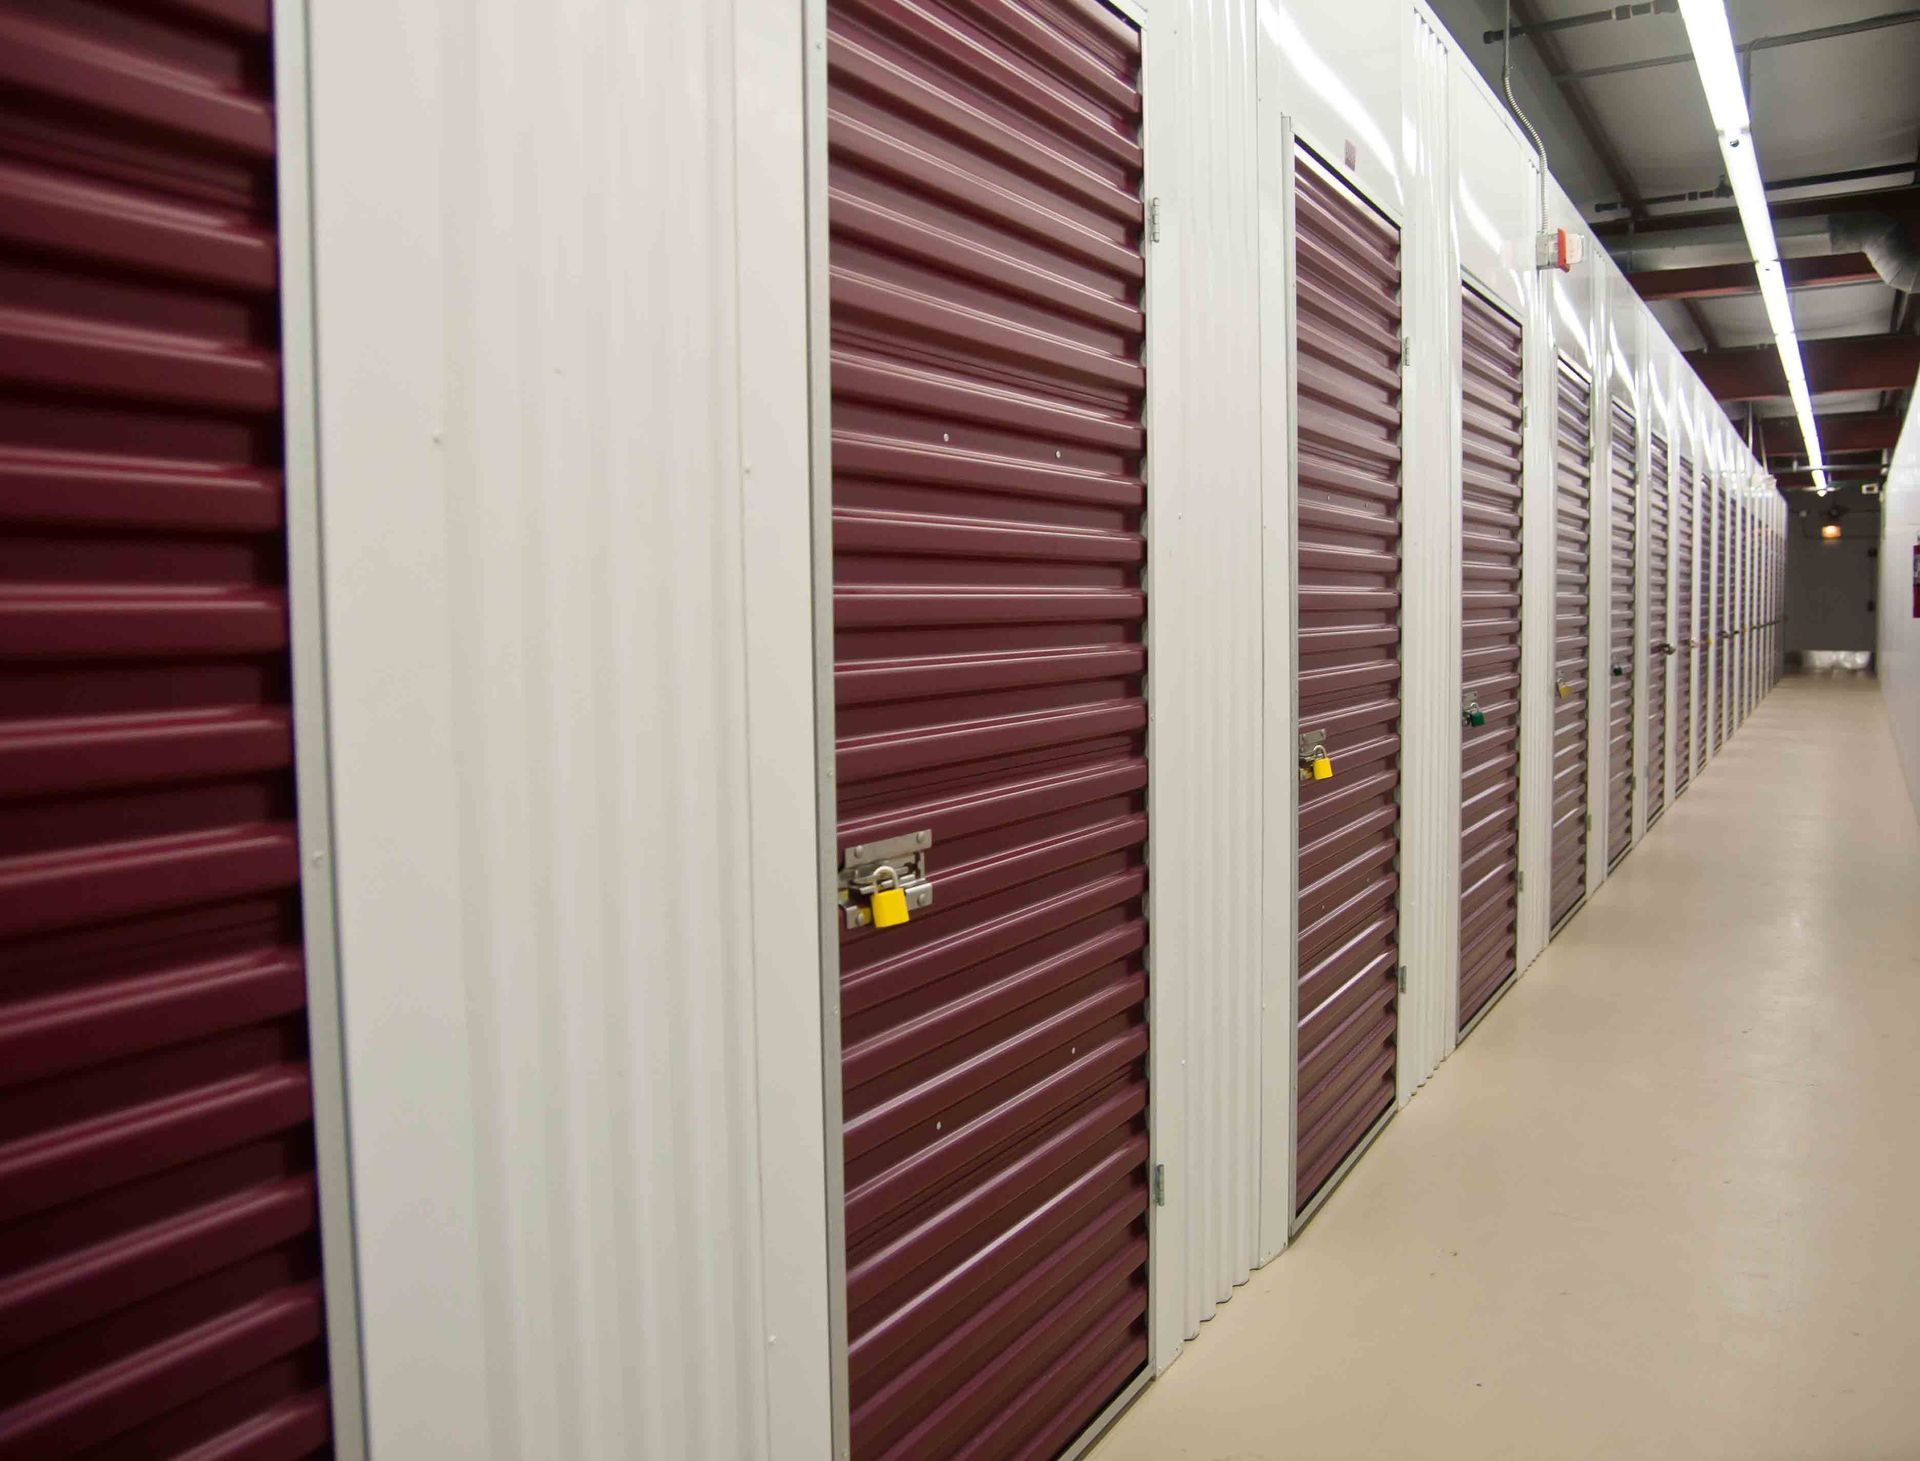 Storage Units — Cumberland, RI — Sharpeye Home & Commercial Property Inspections